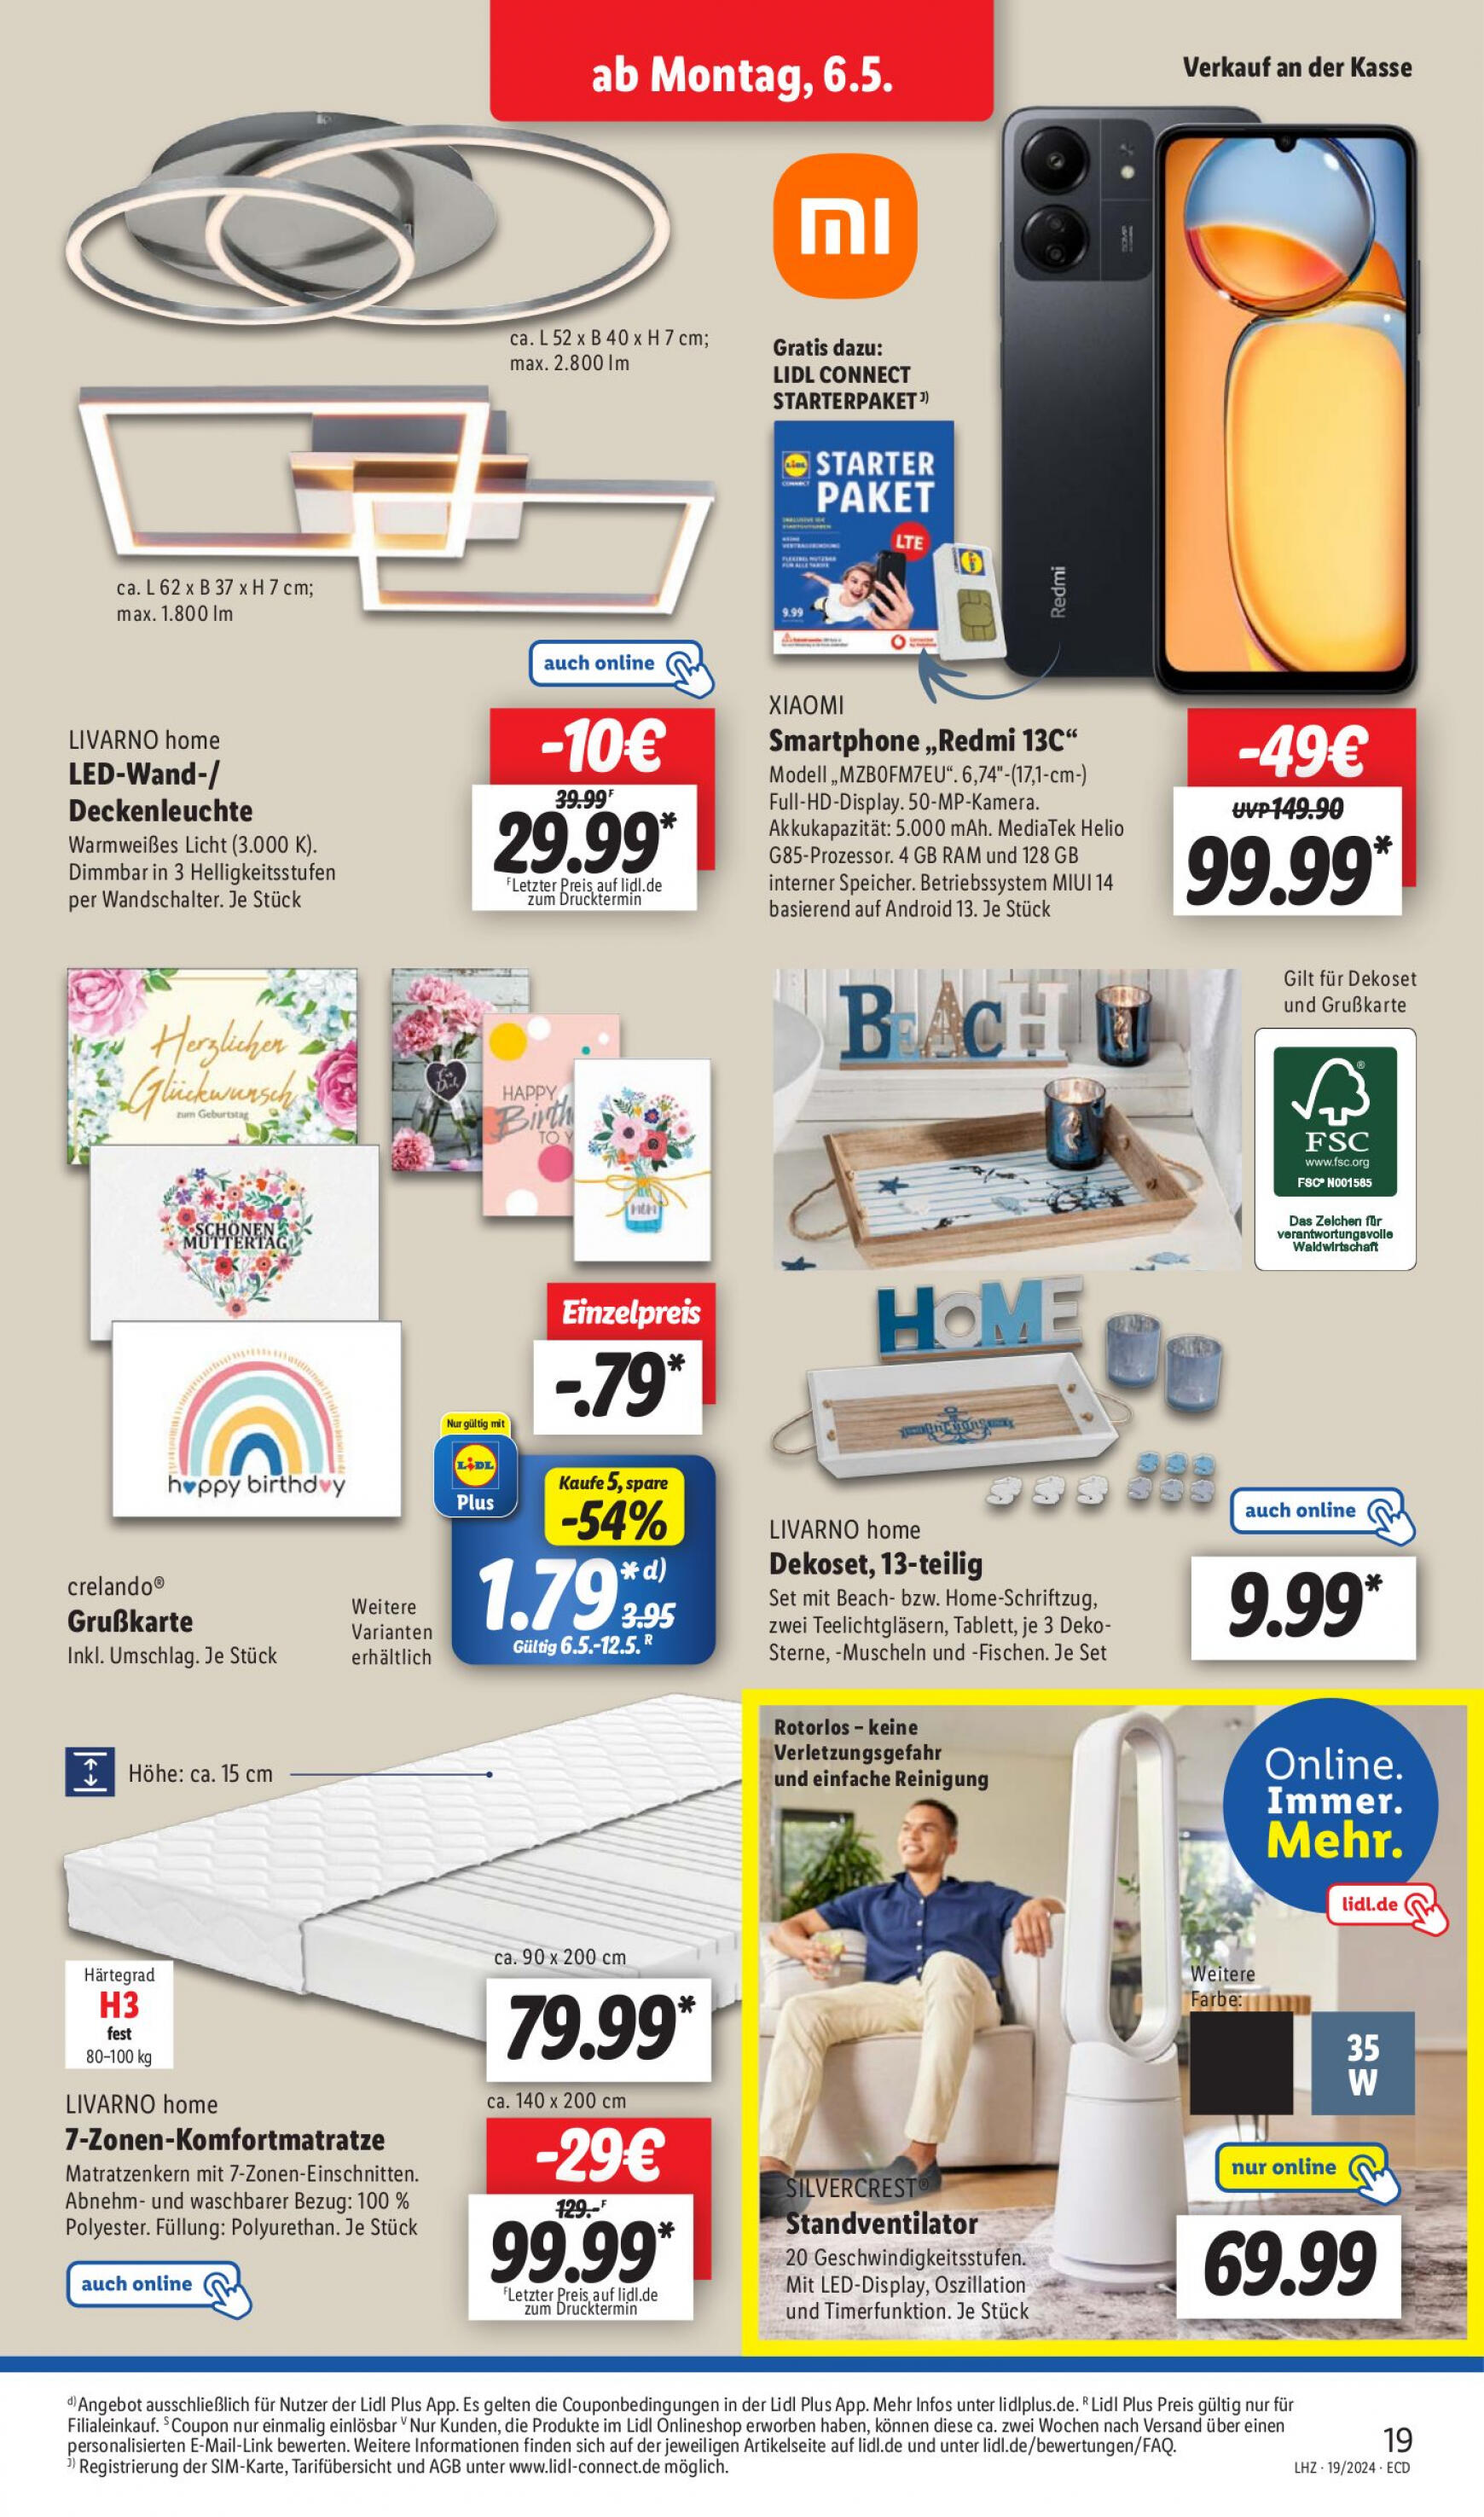 lidl - Flyer Lidl aktuell 06.05. - 11.05. - page: 21